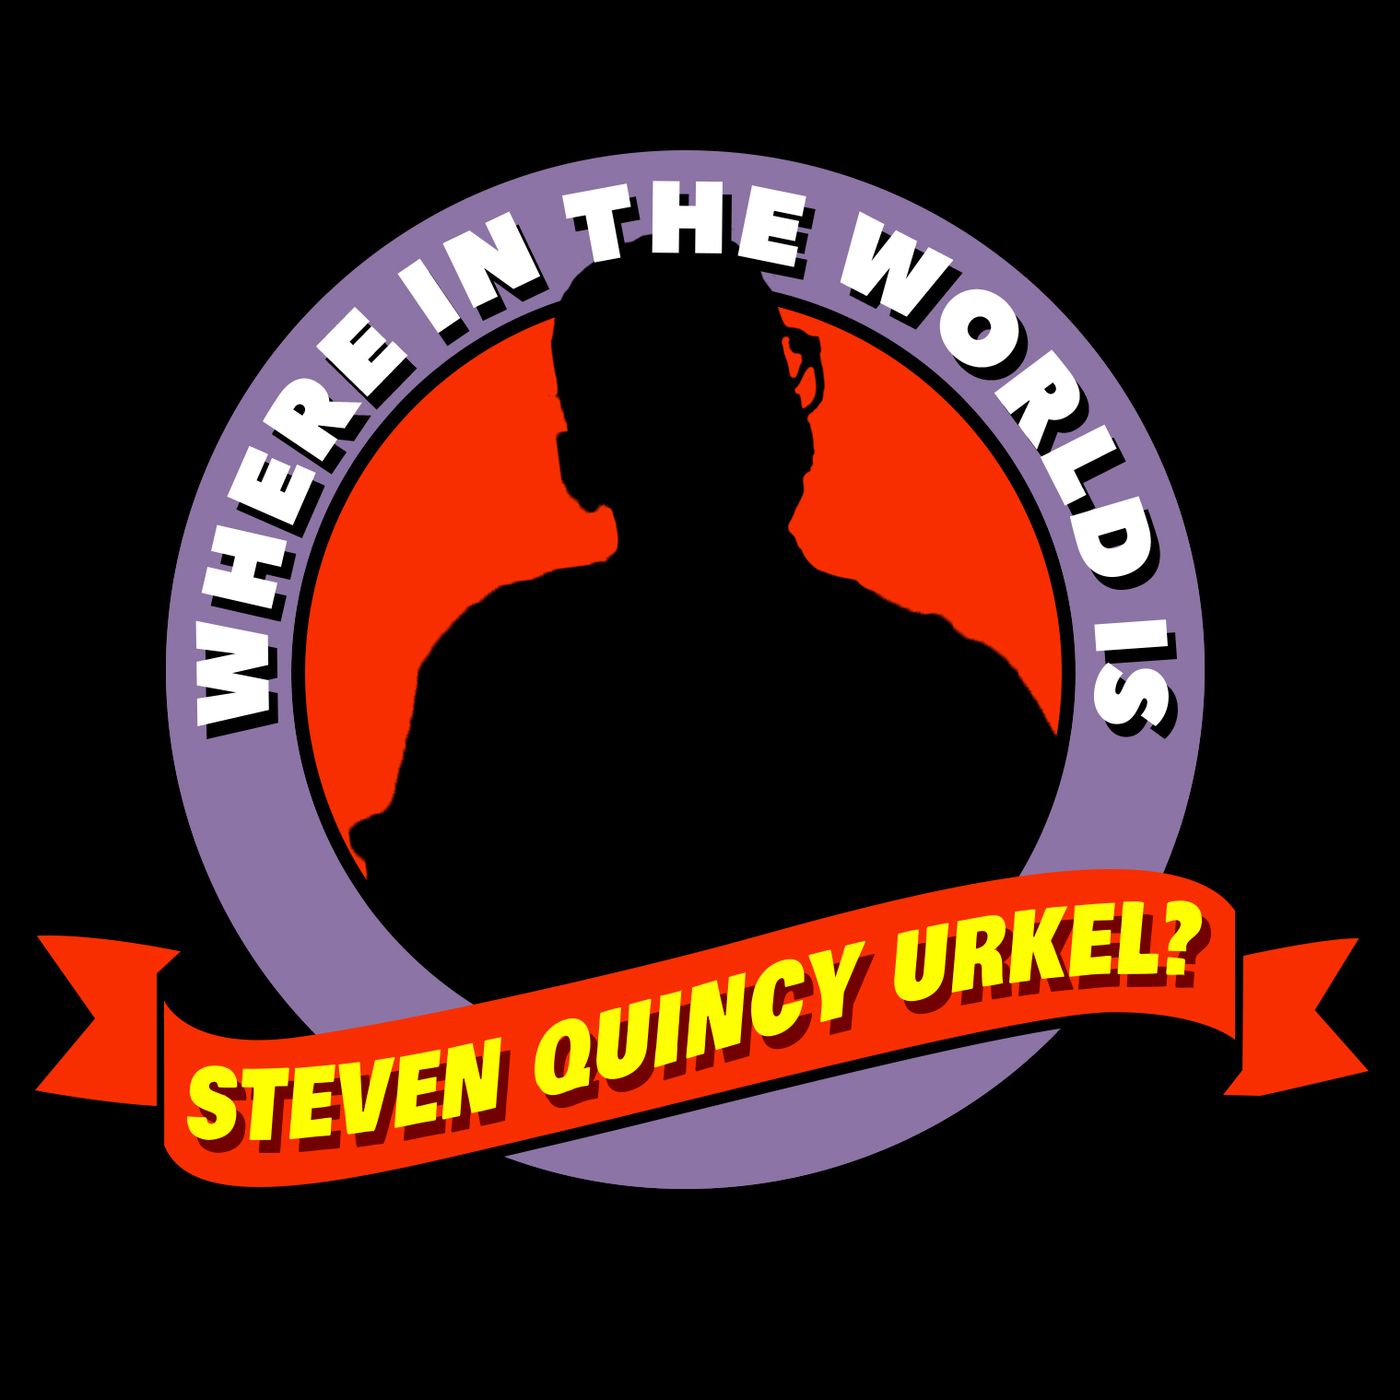 Where in the World is Steven Q. Urkel?